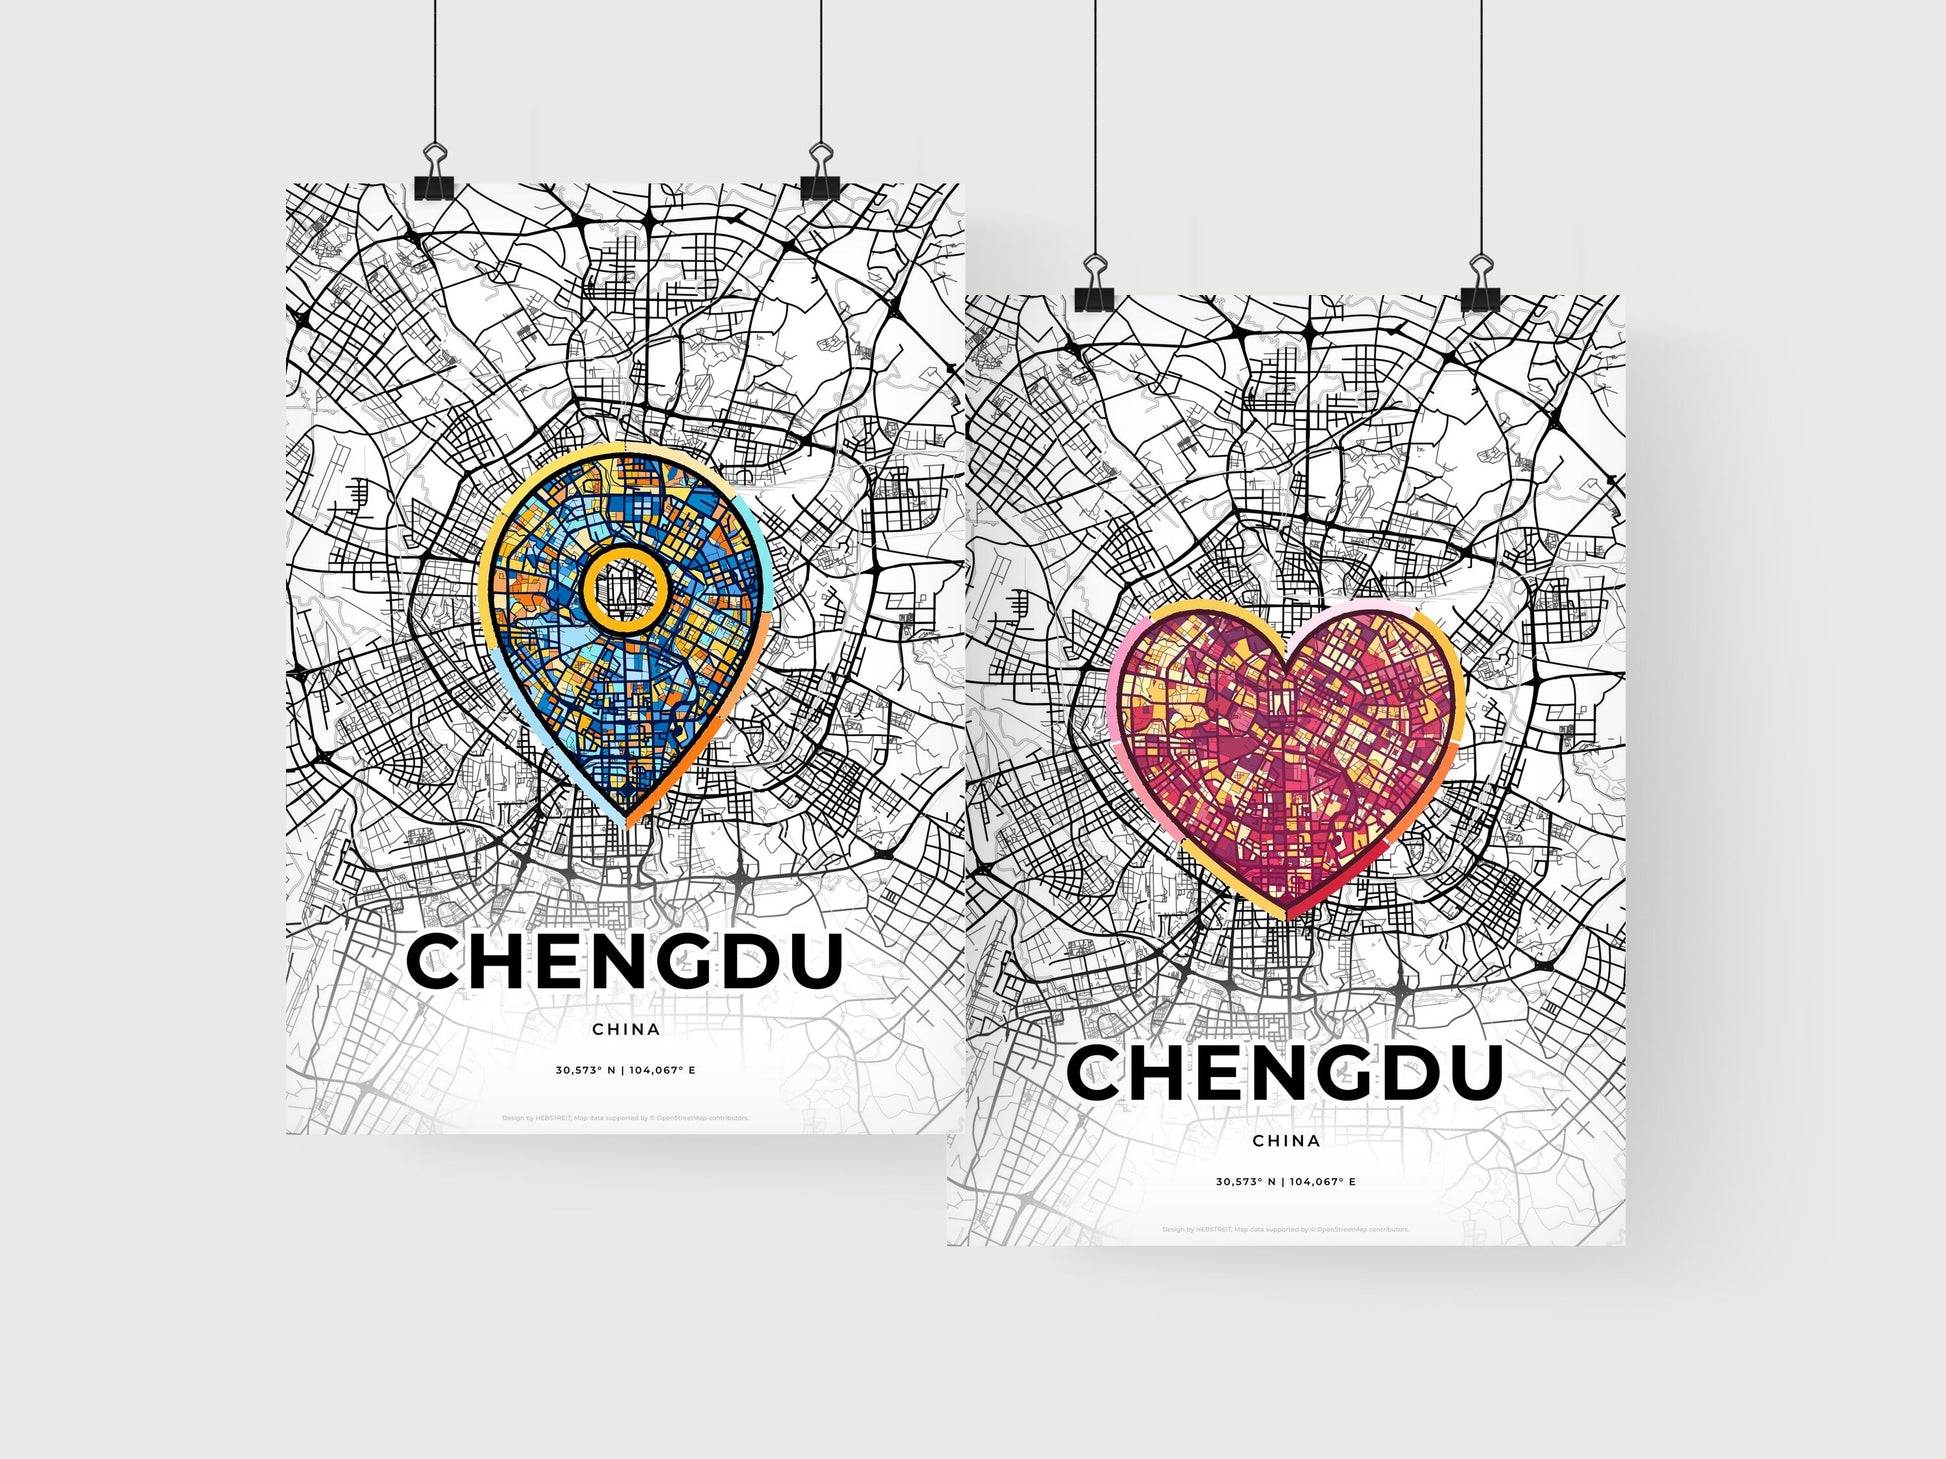 CHENGDU CHINA minimal art map with a colorful icon. Where it all began, Couple map gift.